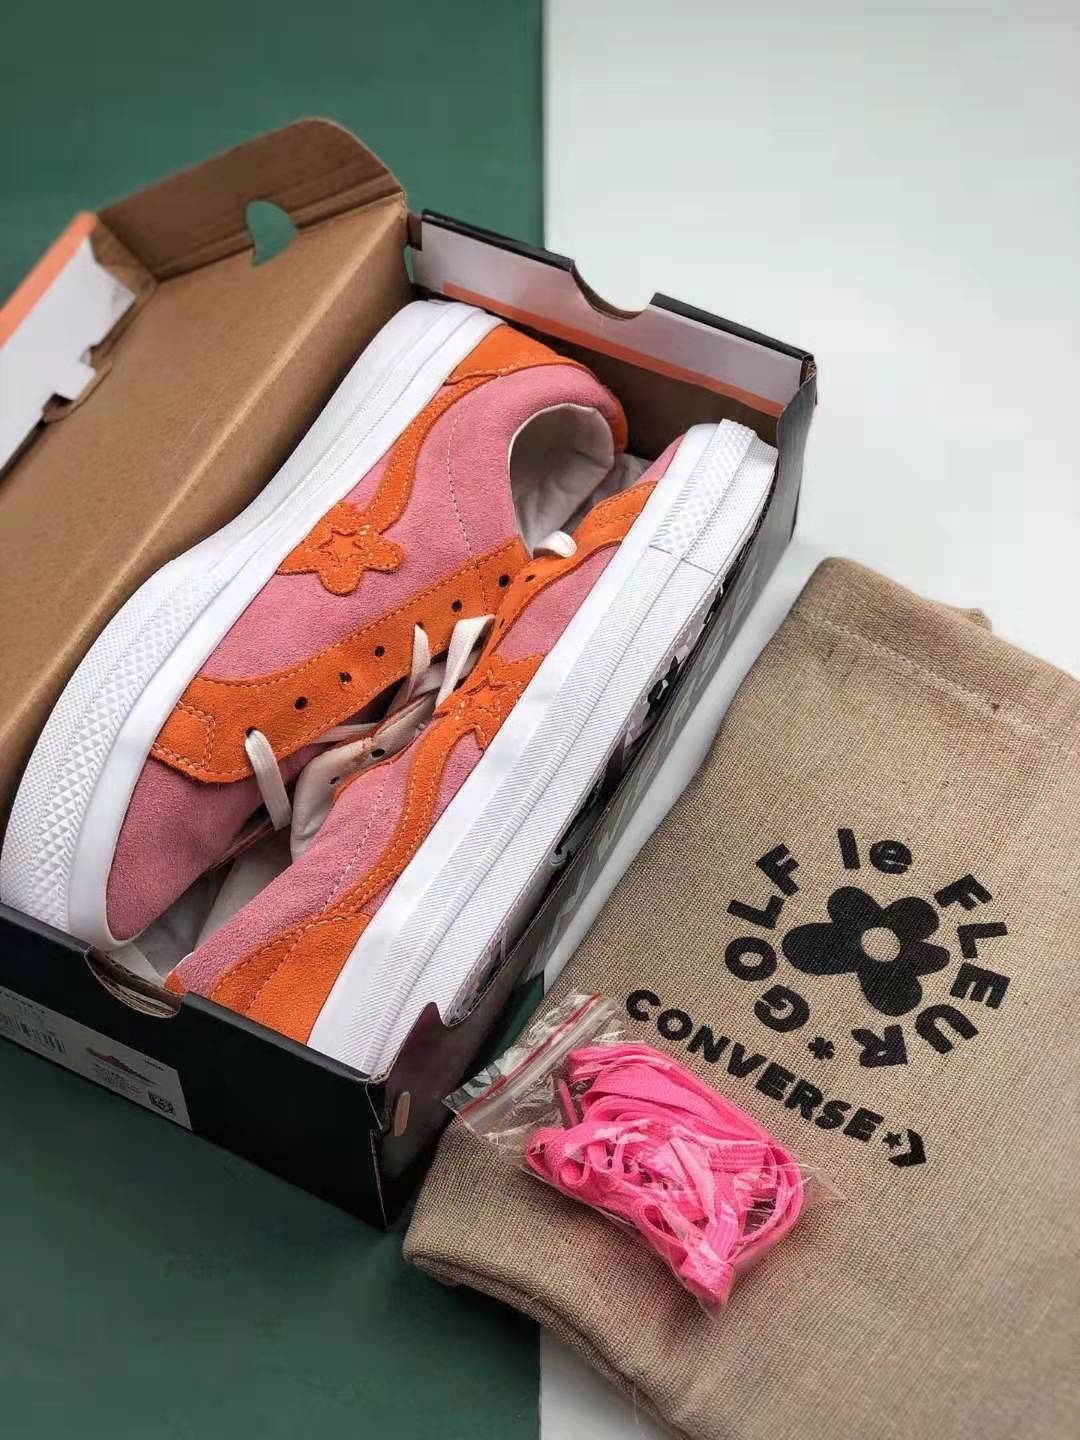 Converse One Star Ox Tyler the Creator Golf Le Fleur Pink Orange 162125C - Unique Style and Vibrant Colors | Free Shipping